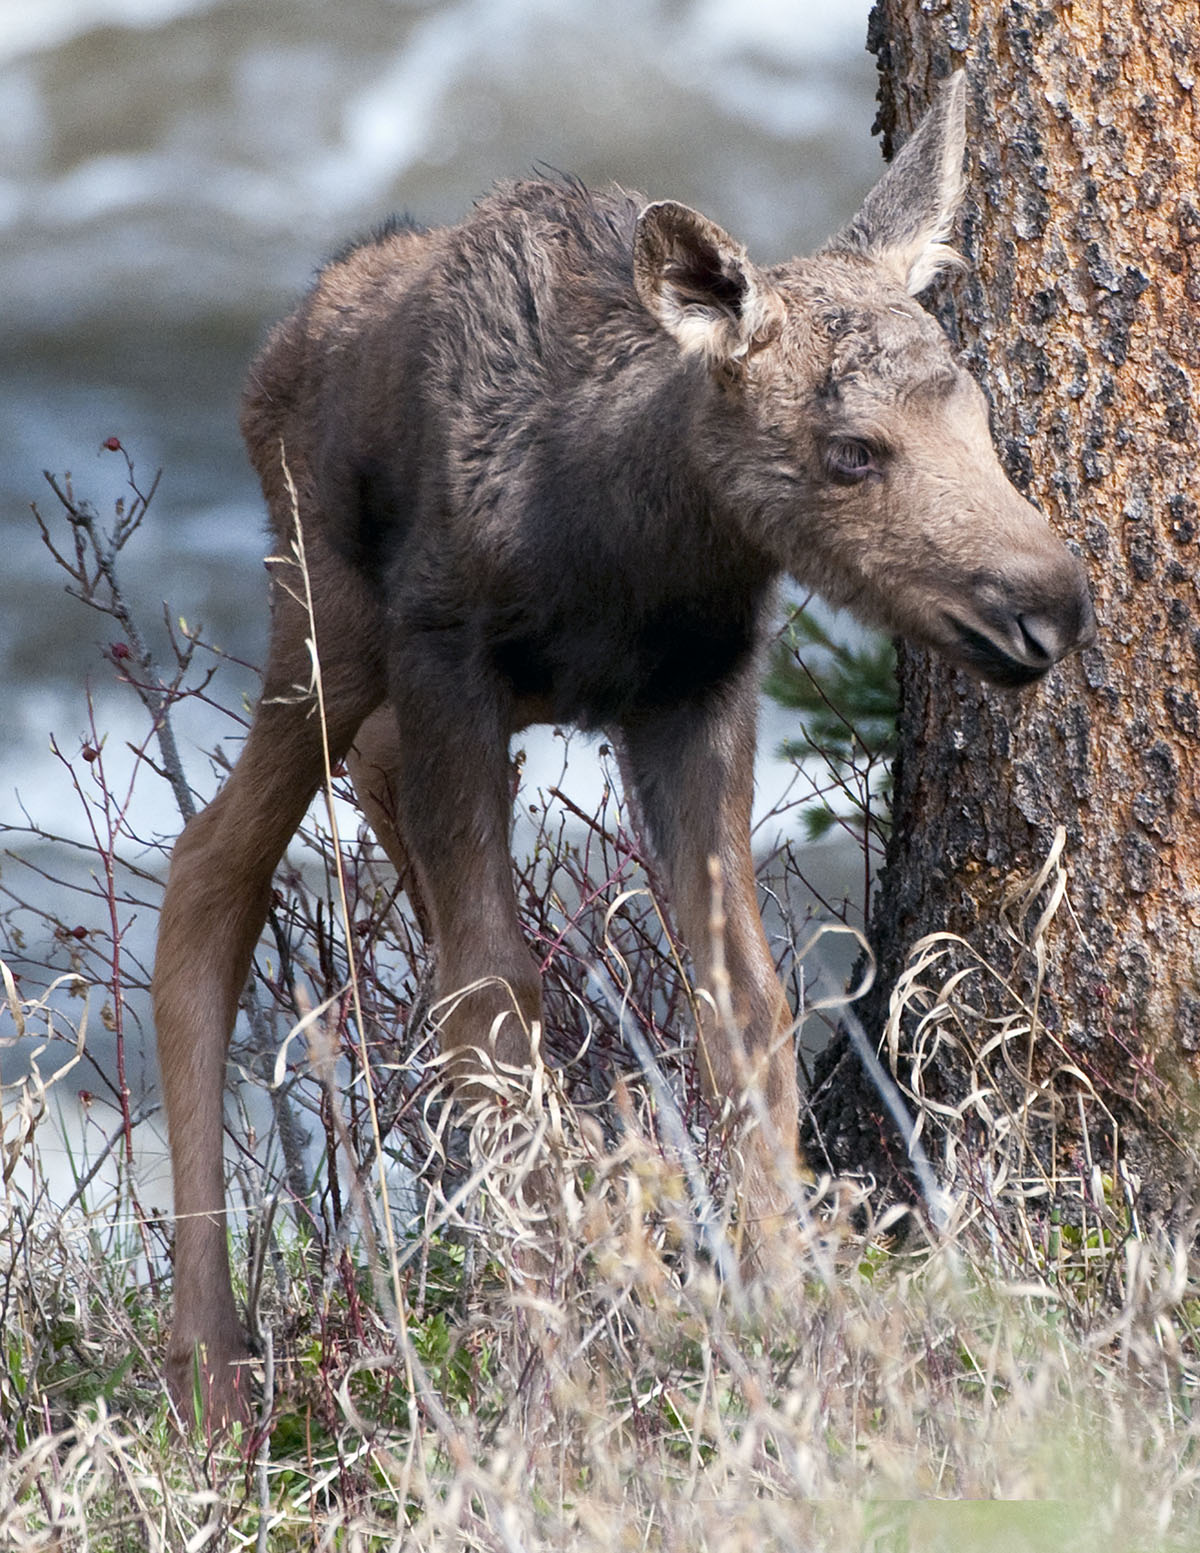 One day old moose calf